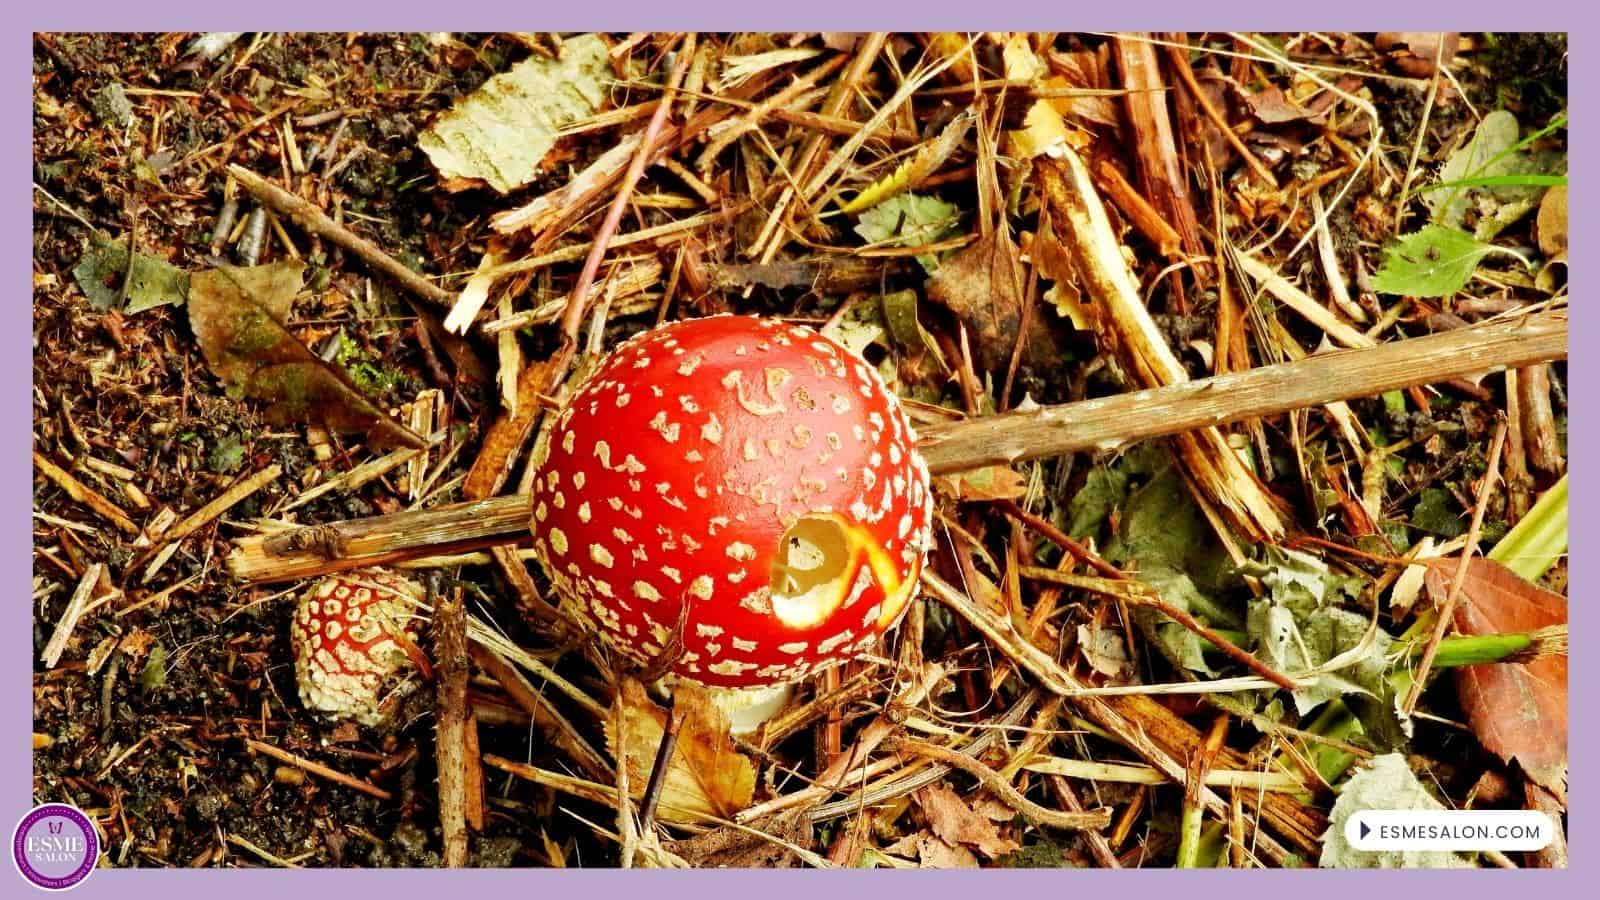 an image of as poisonous red Fly Agaric mushroom